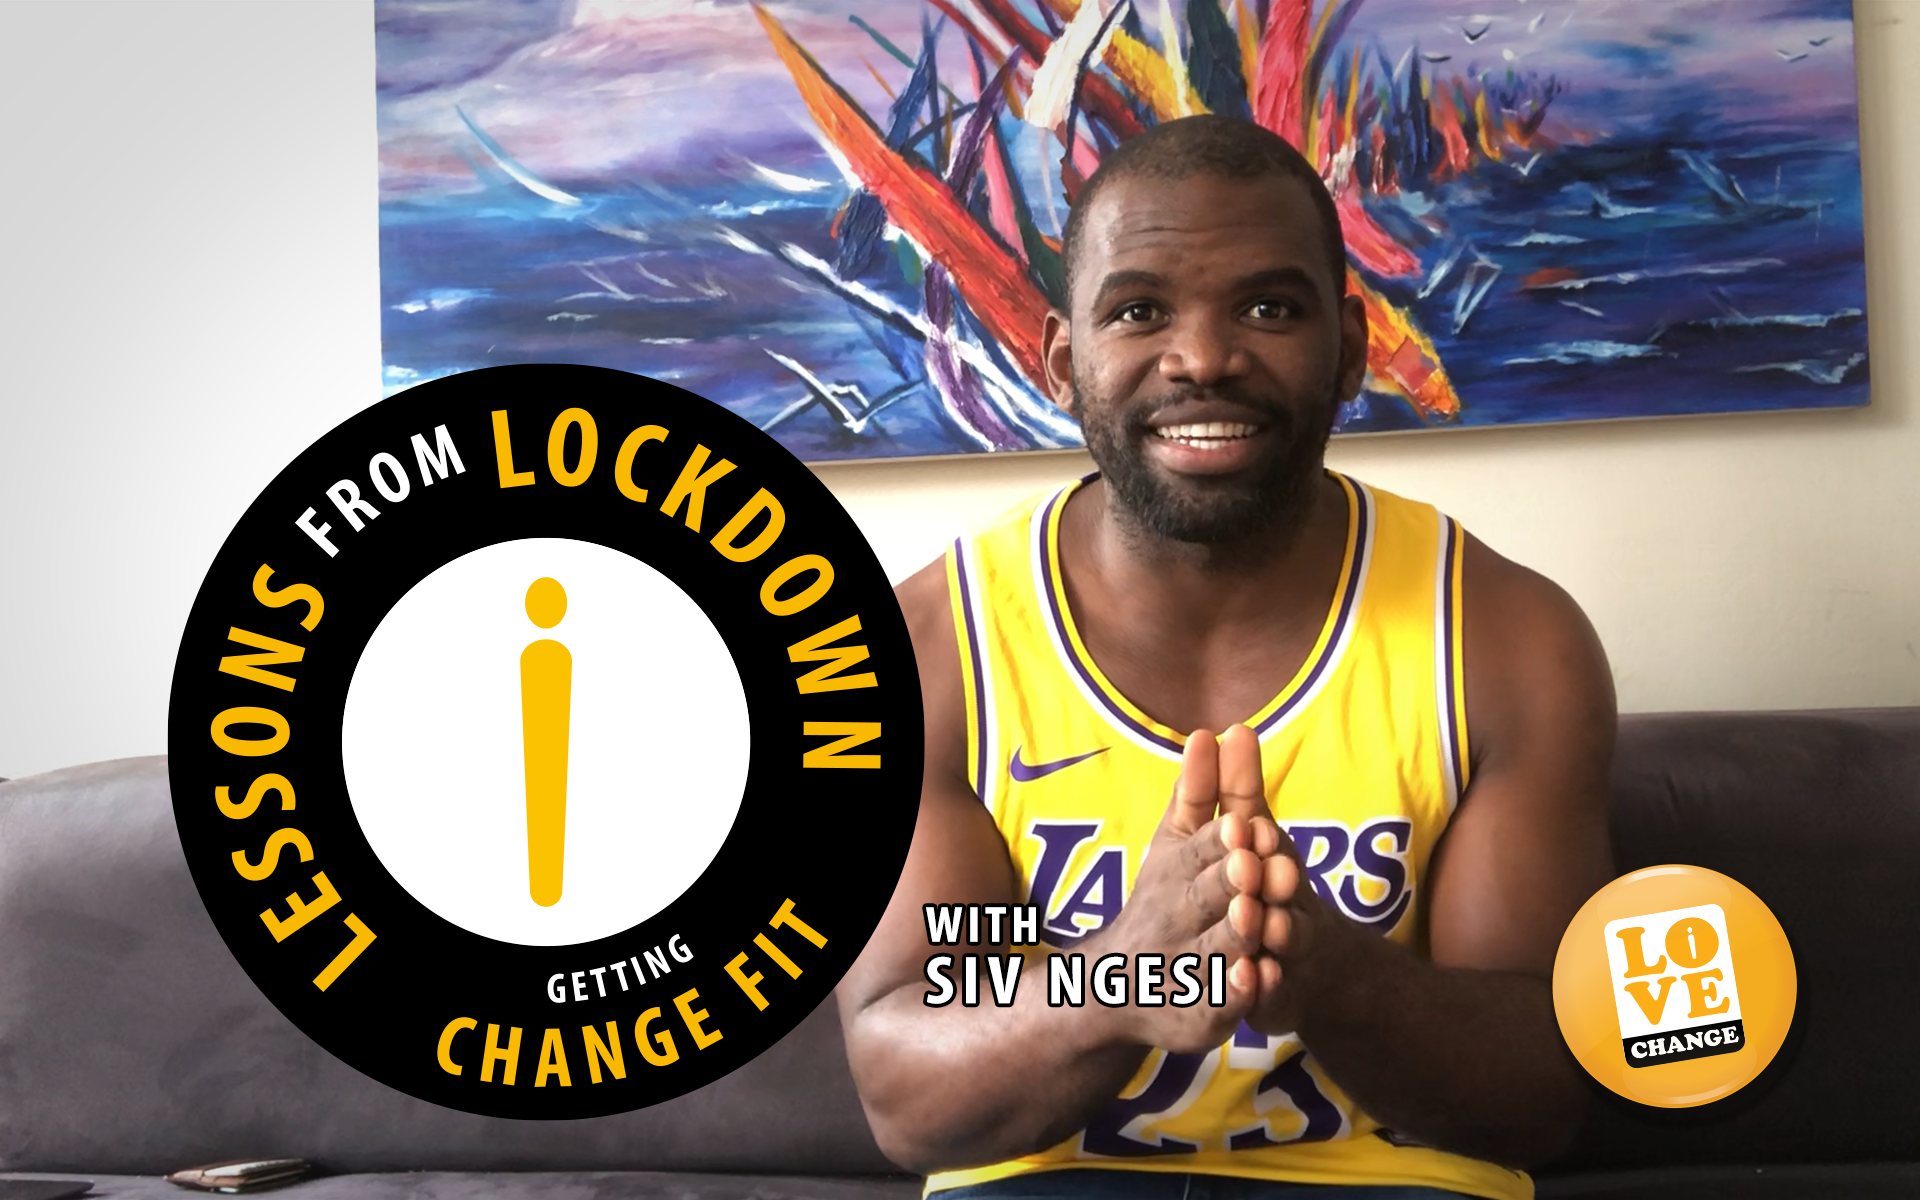 Lessons from Lockdown with Siv Ngesi